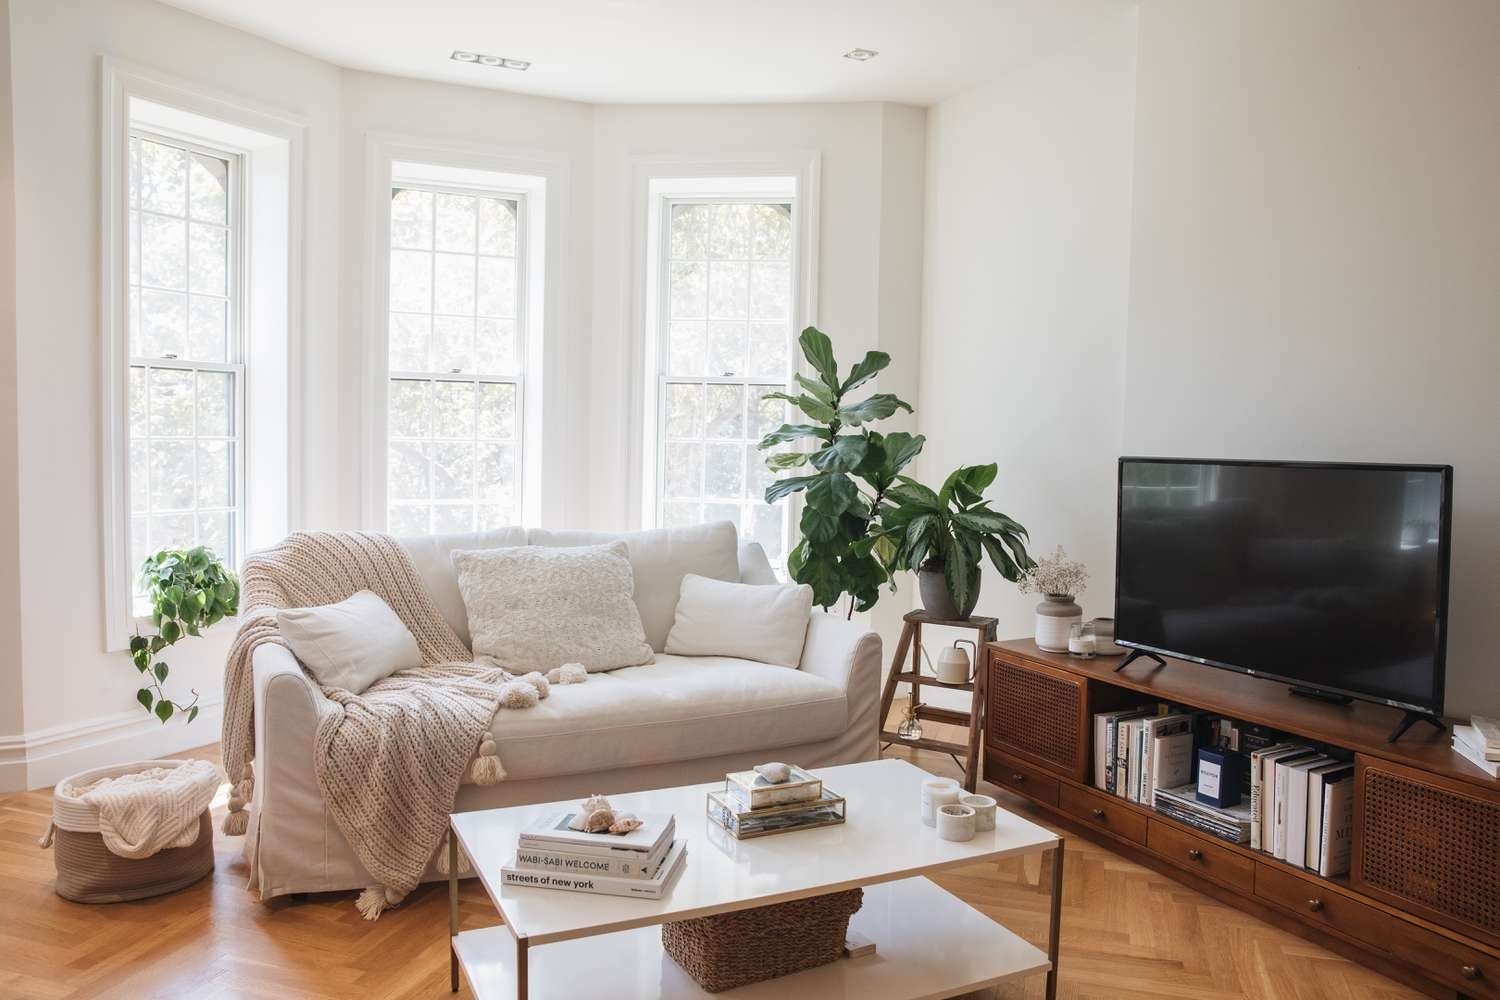 13 Rules For Arranging Living Room Furniture &amp; Tvs within How To Arrange Living Room